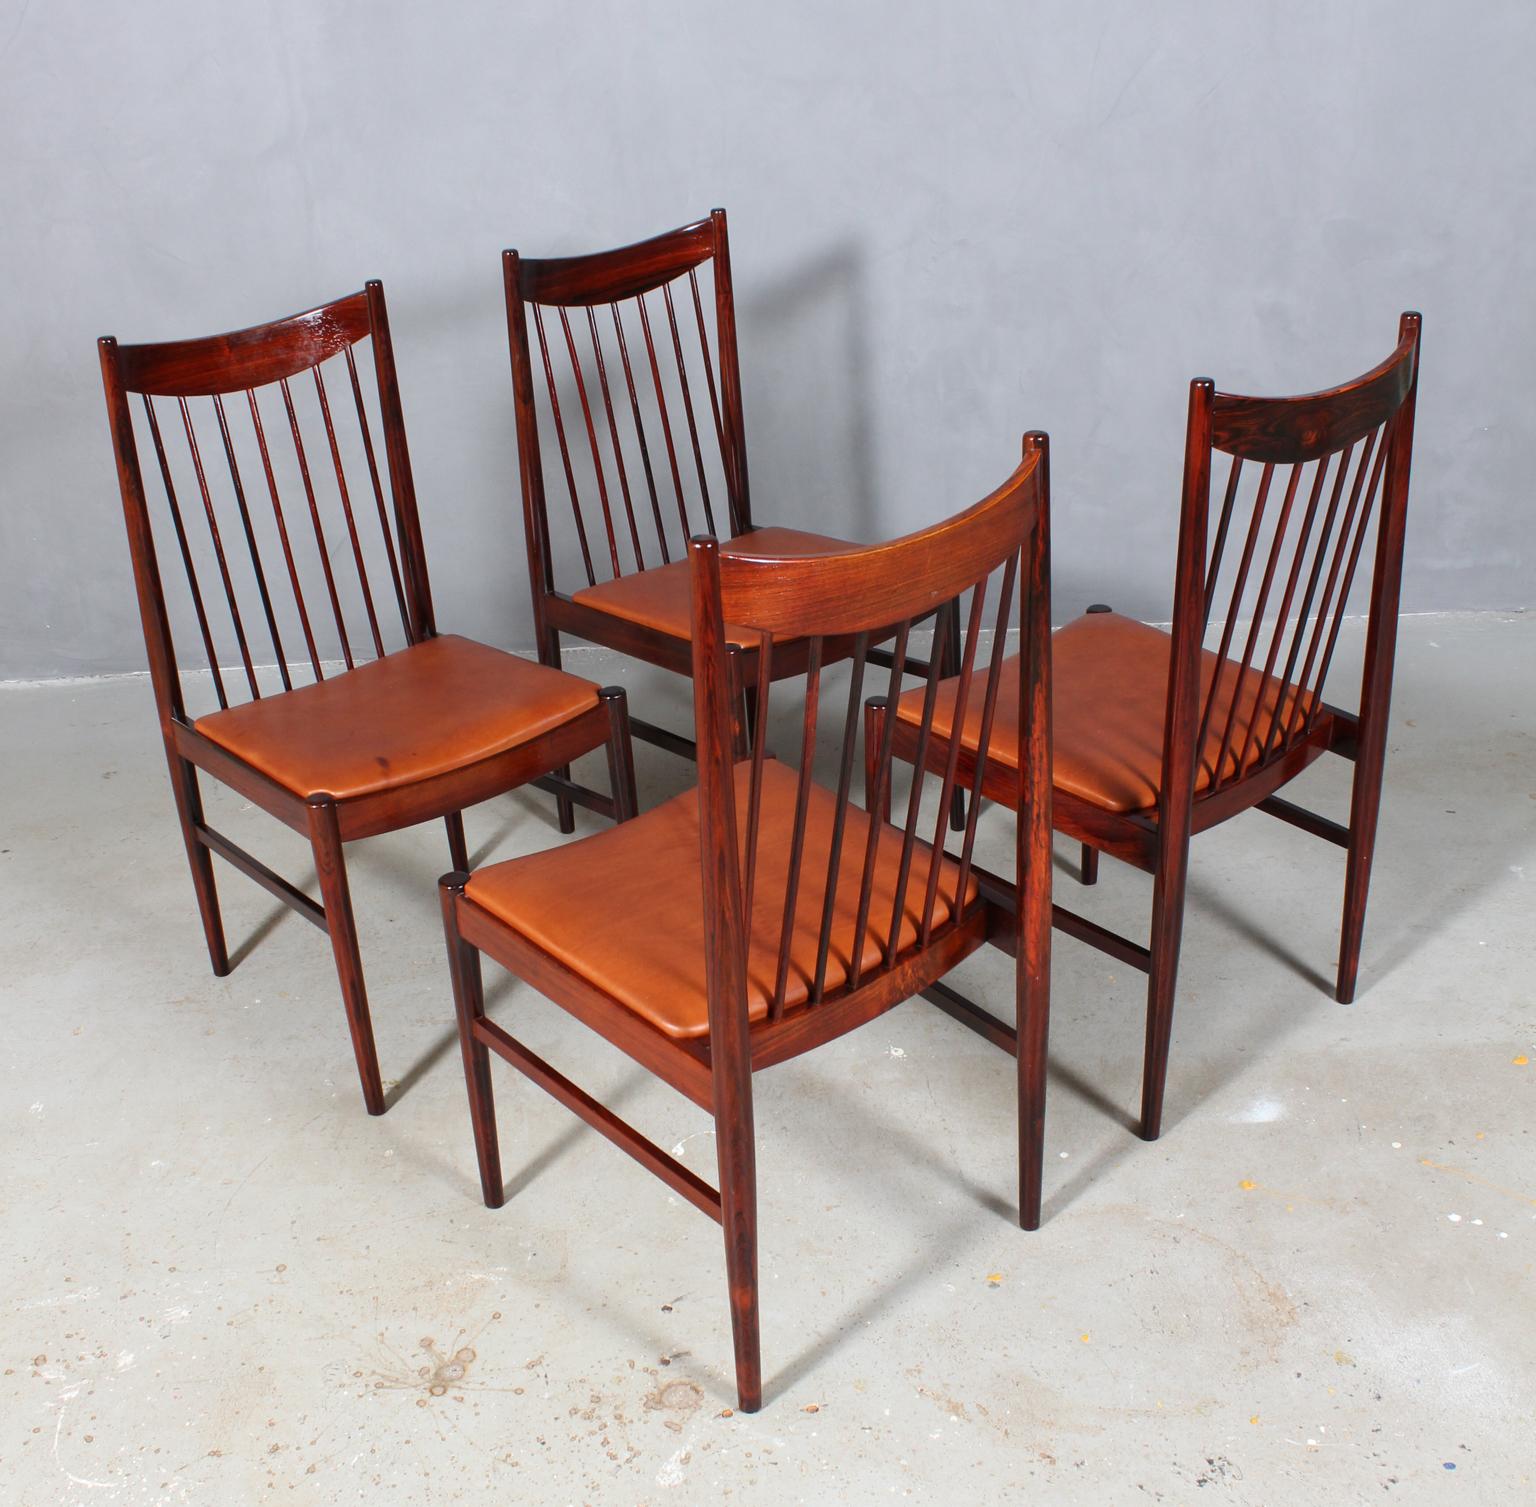 Set of six Arne Vodder chairs new upholstered with tan aniline leather.

Frame in partly solid rosewood.

Model 422, made by Sibast.